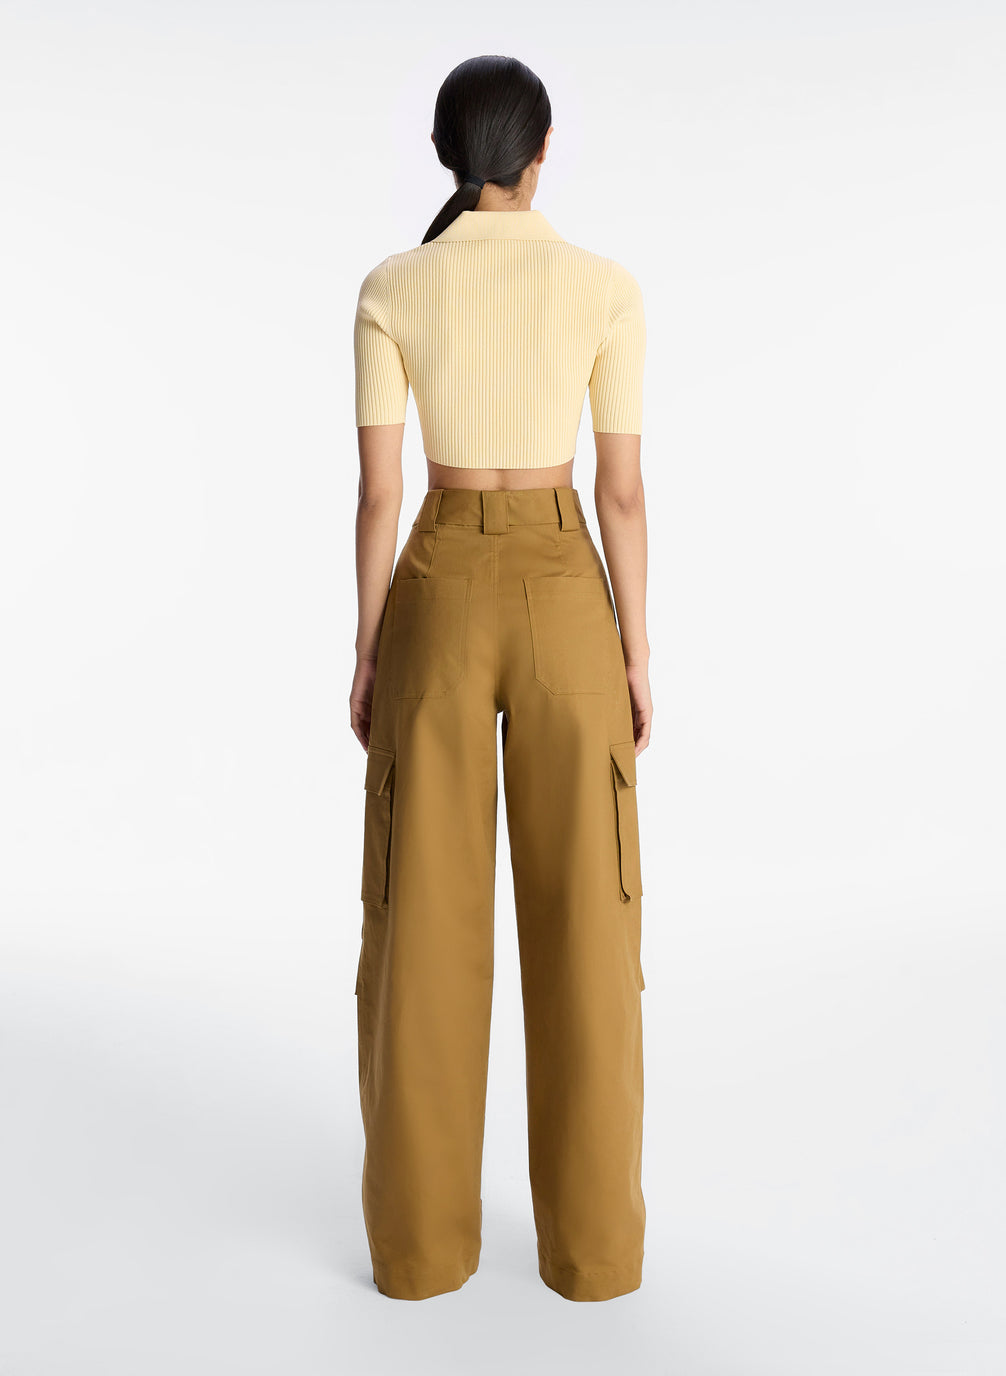 back view of woman wearing yellow cropped collared shirt and tan cargo pants